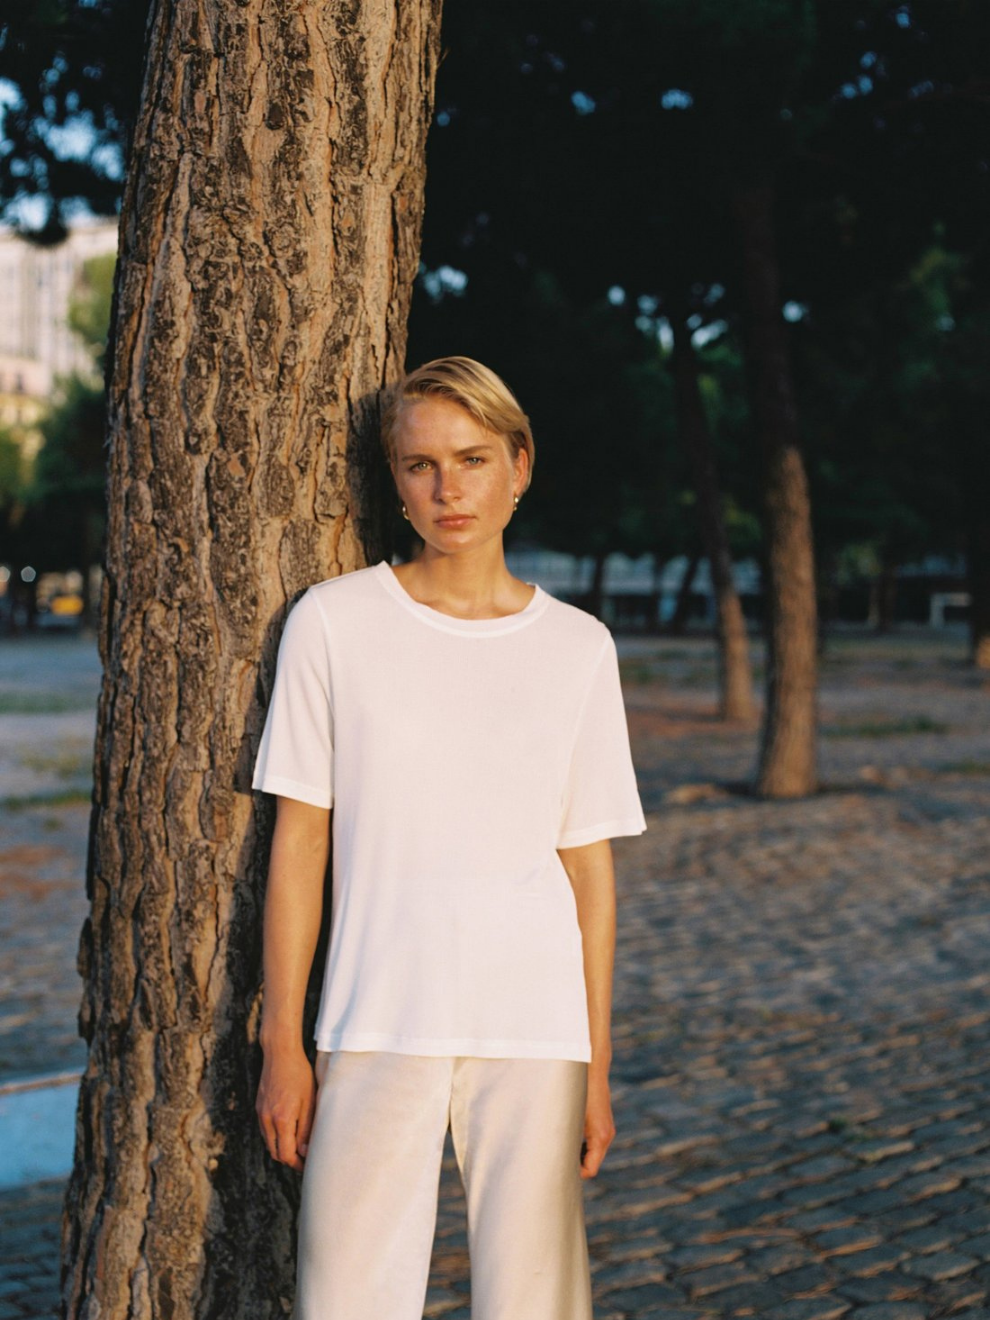 Model shot of Silk White Ribbed T-shirt by Silk Laundry worn with Bias Cut Pants in Hazelnut